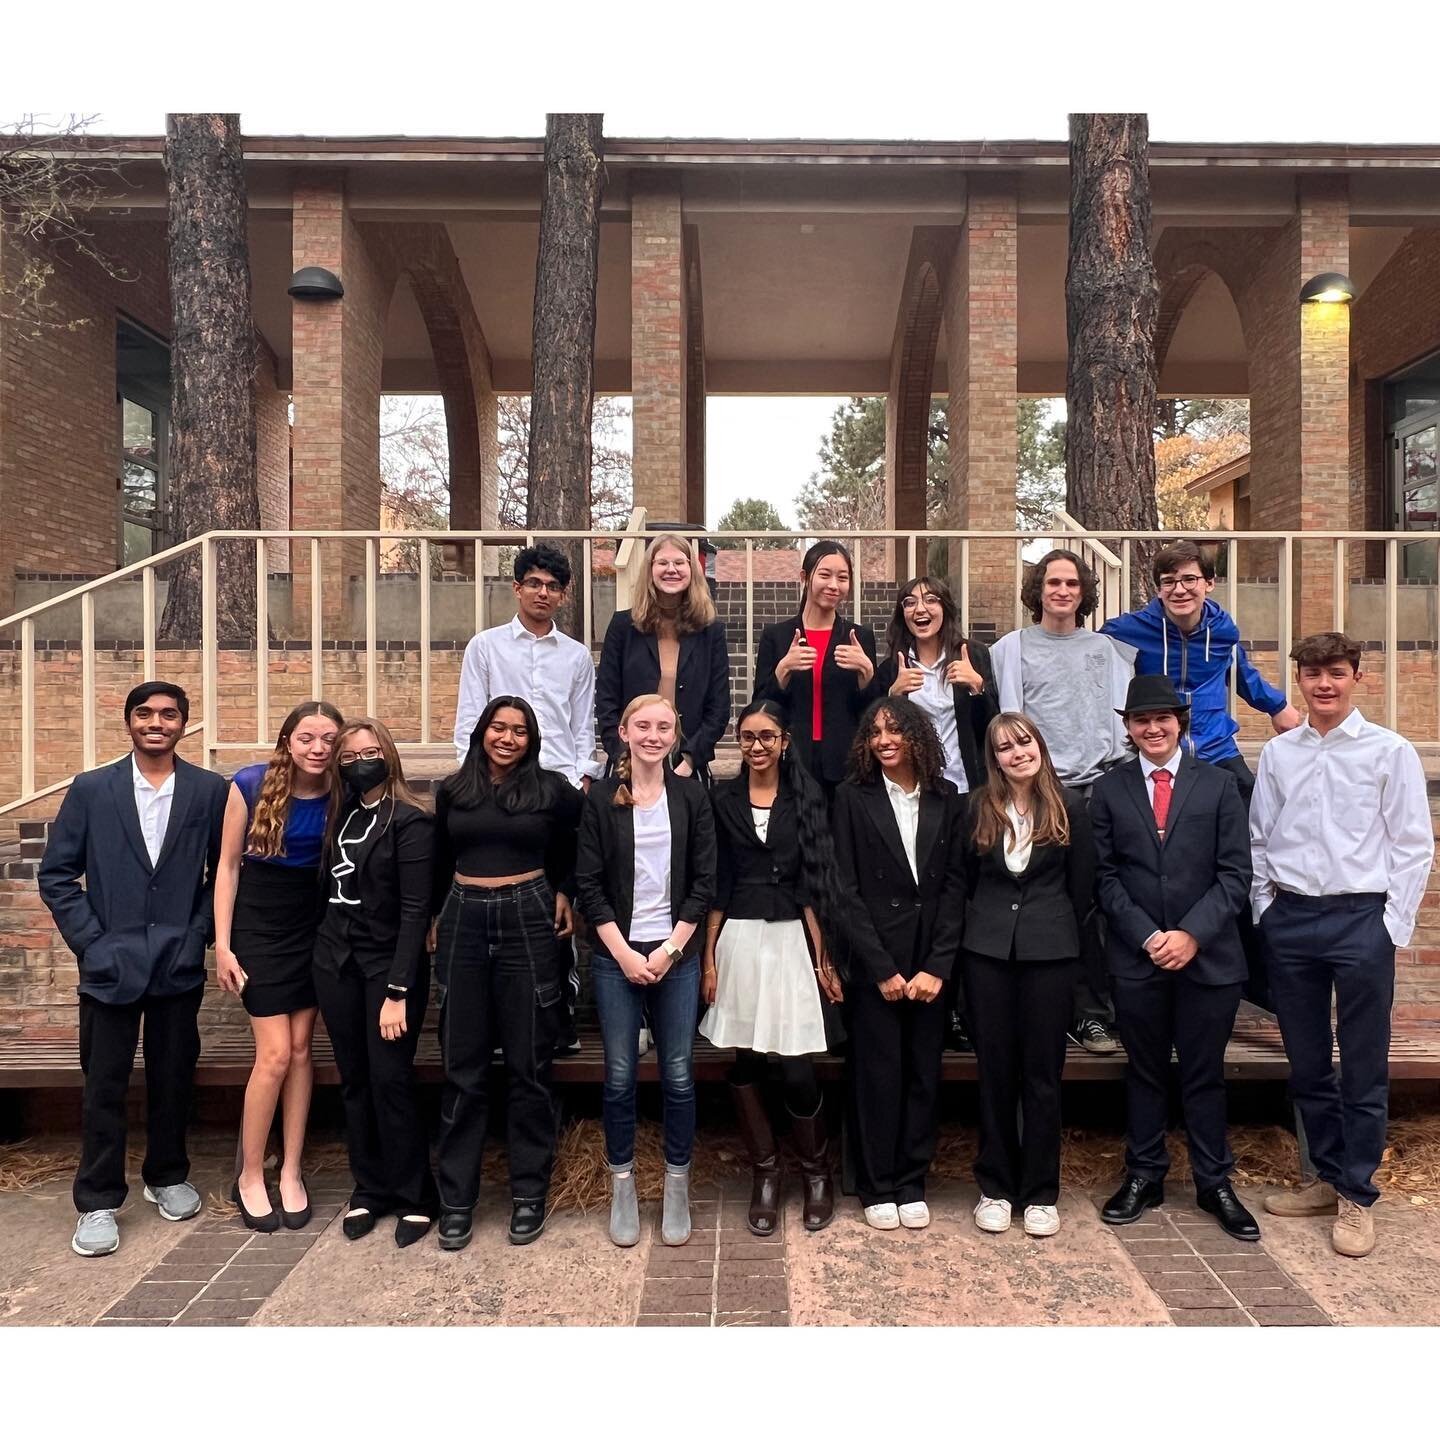 Fabulous job well done to our competitors for their virtual tournament last weekend at the NSDA Springboard Series Winter Capstone! Two of our competitors were even featured in the Round 4 livestreams 🎥 

Swipe to see full results. 

Full write-up a